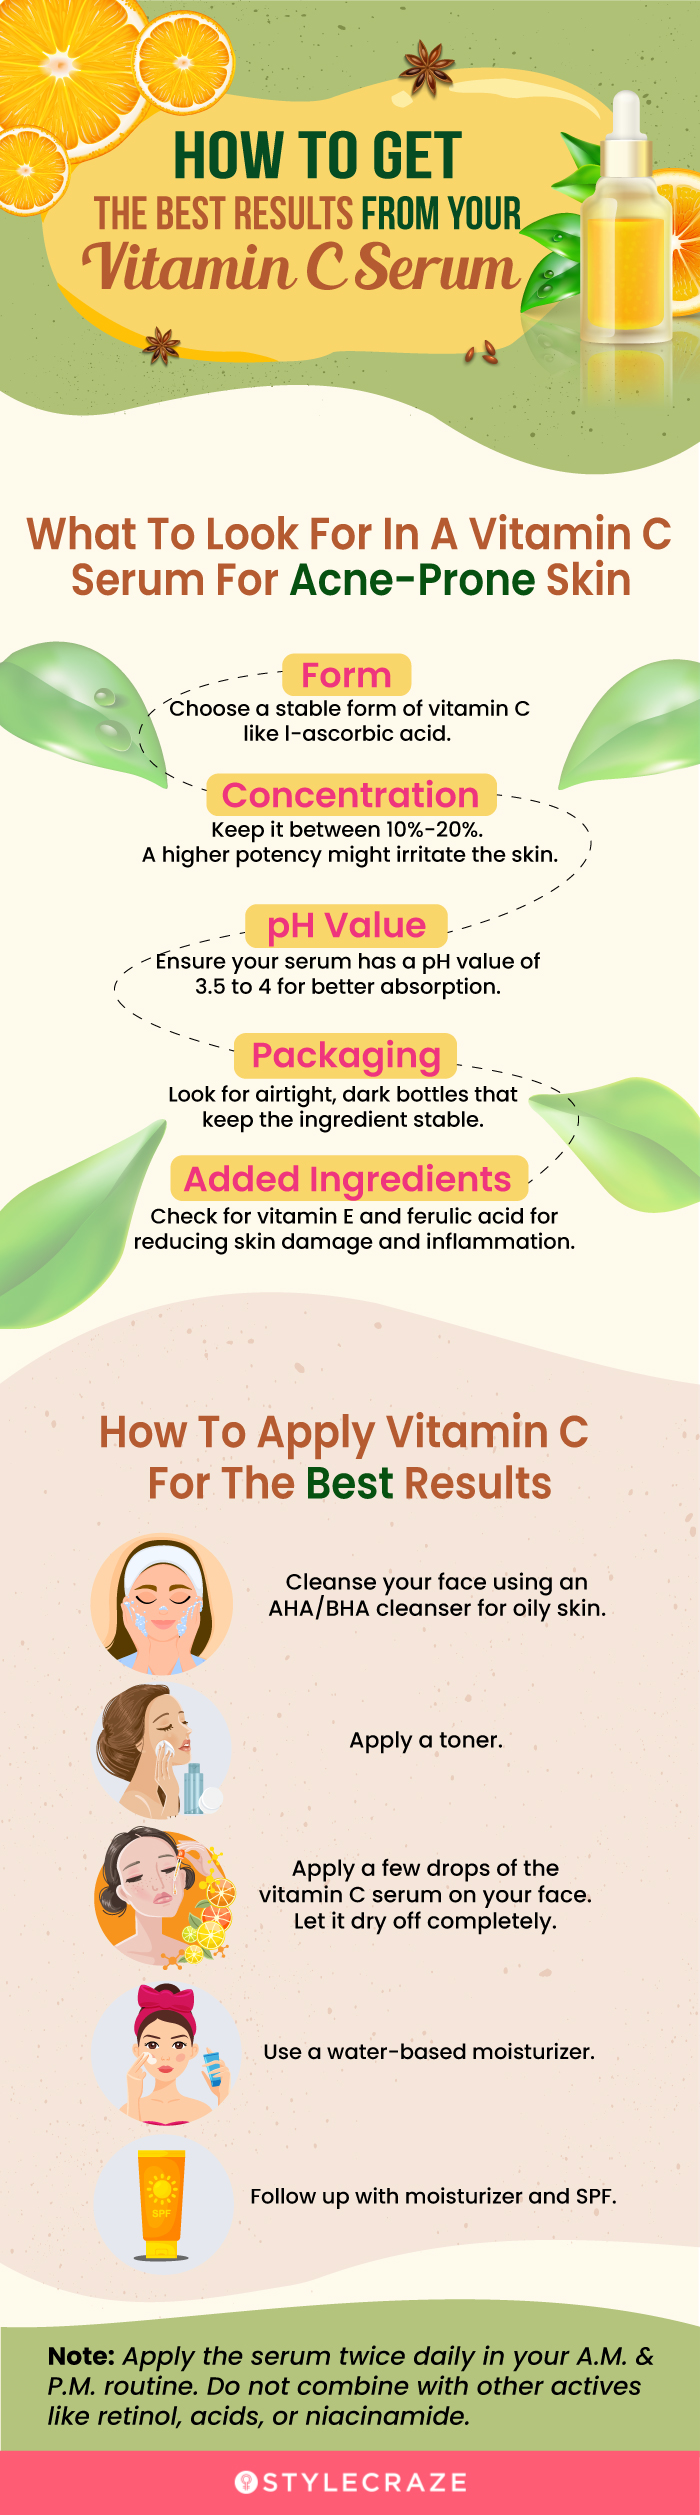 How To Get The Best Results From Your Vitamin C (infographic)